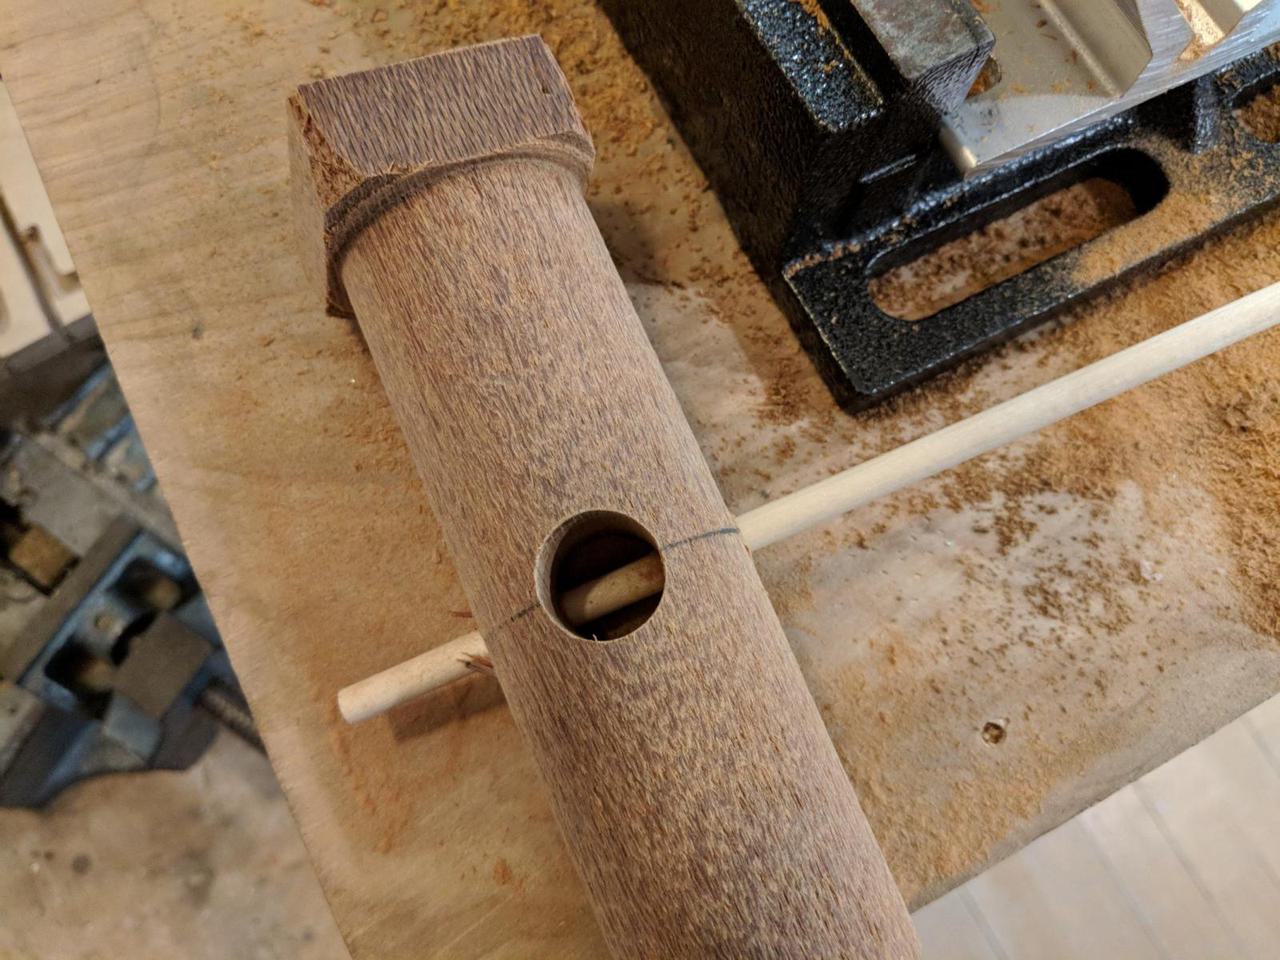 dowel rod passing through the center of the lacewood